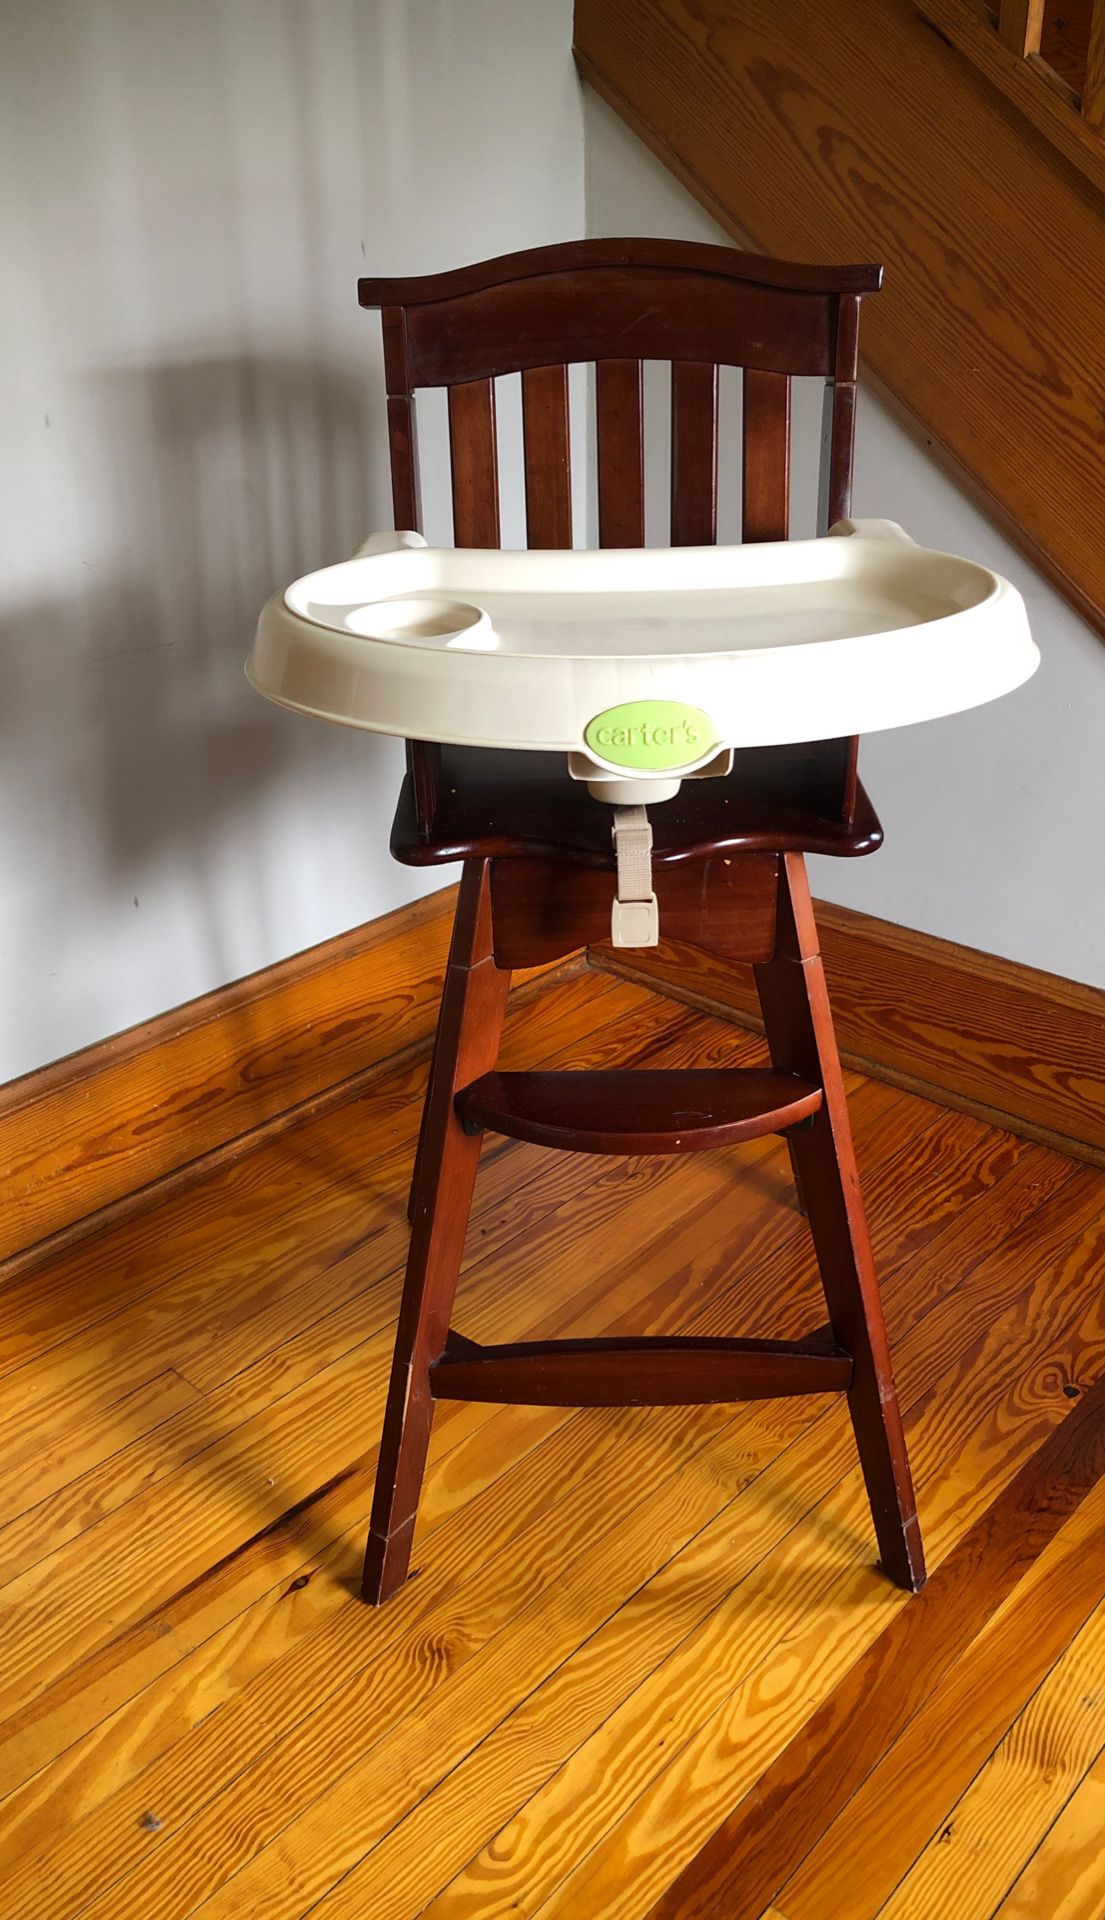 Clean Carter’s high chair for infant.